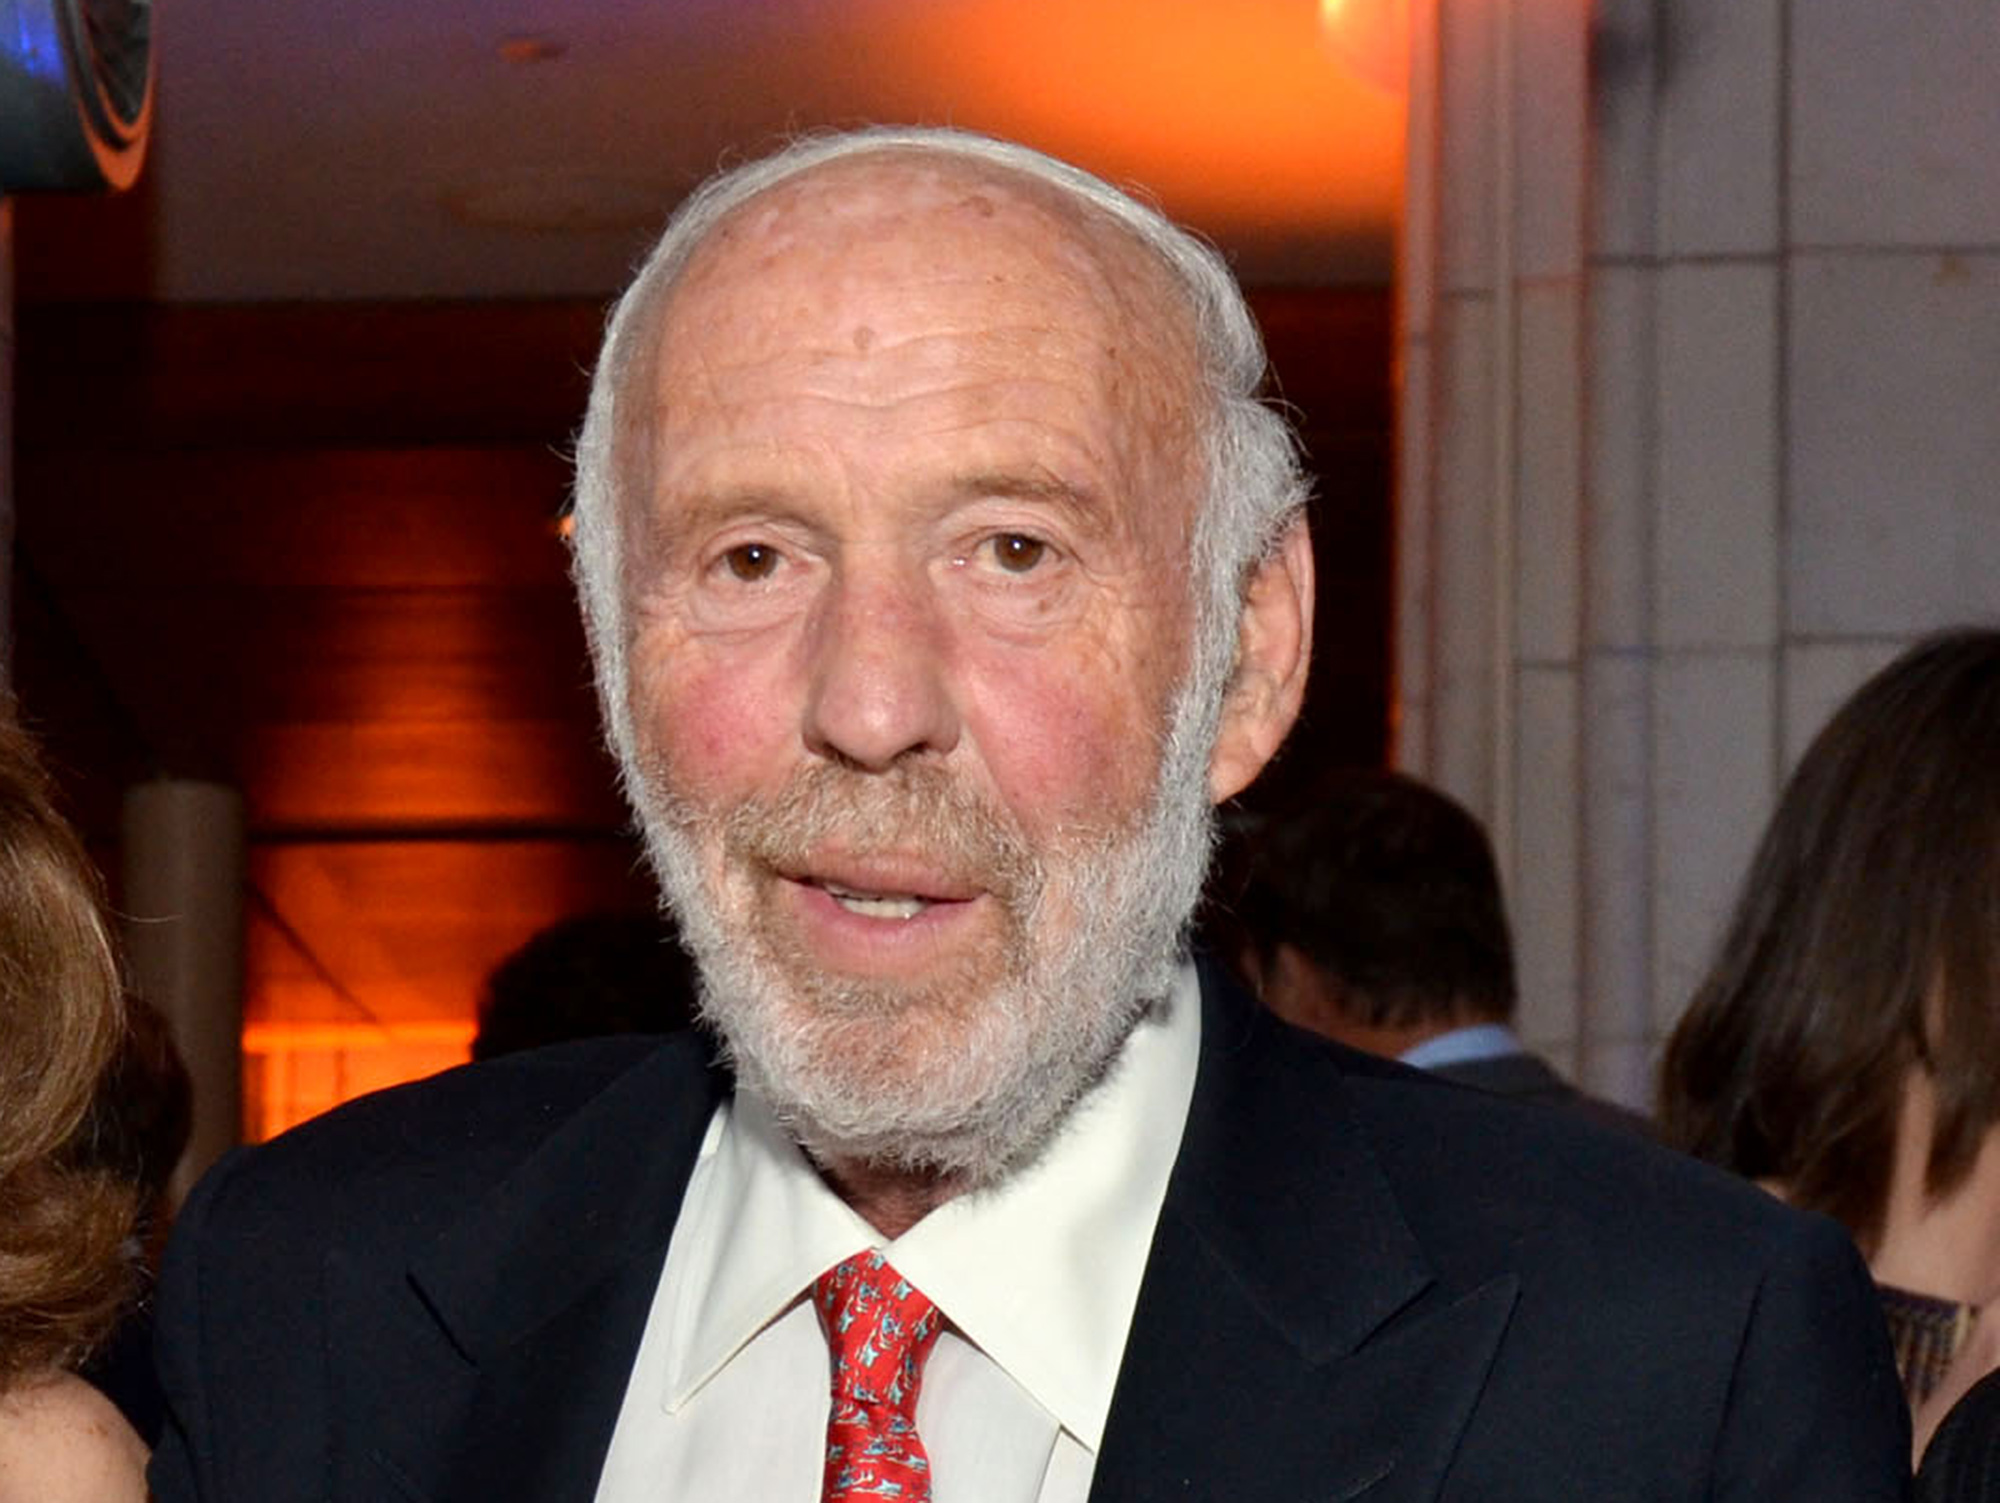 Jim Simons Revamps Renaissance Board in Nod to New Generation Bloomberg